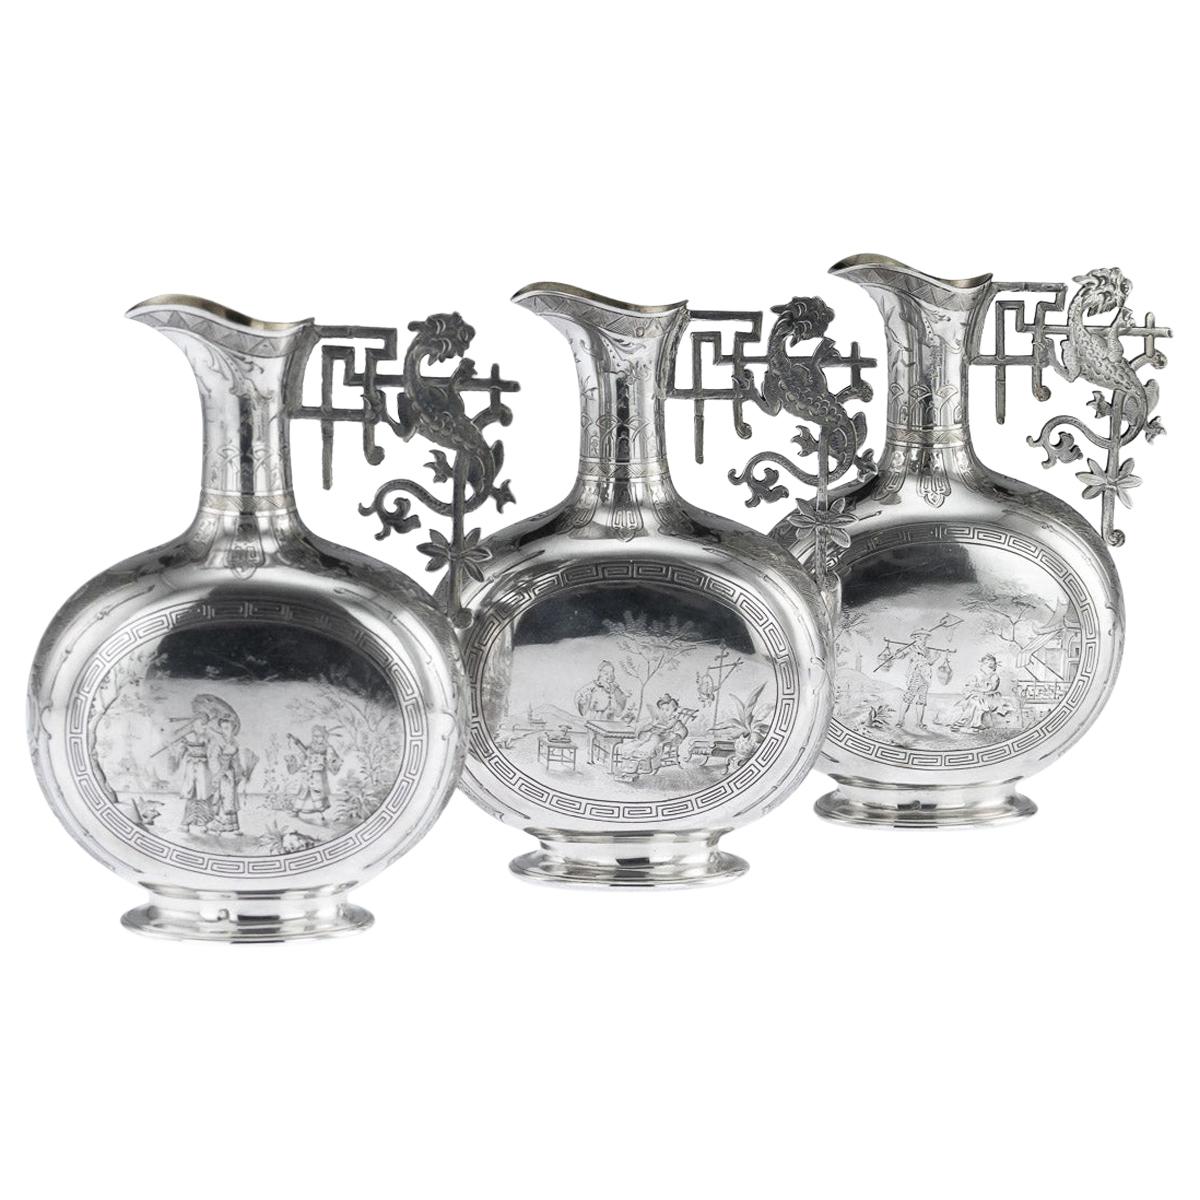 19th Century French Solid Silver Chinoiserie Ewers, Veyrat, Paris, circa 1830